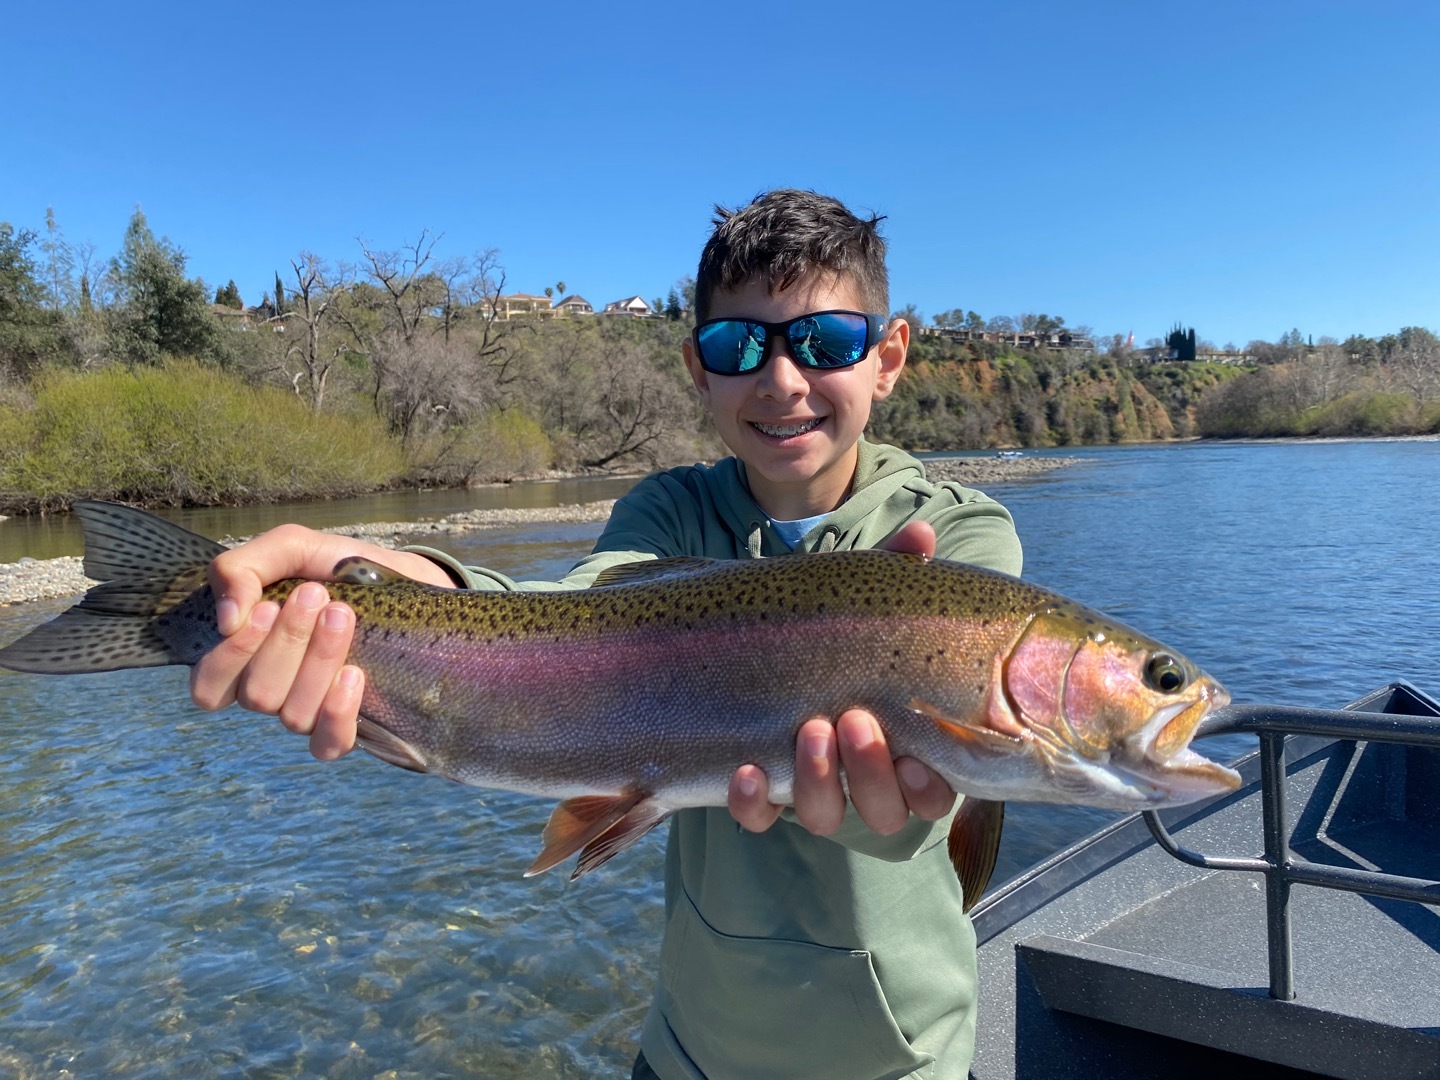 Wild rainbow bite as good as it should be!